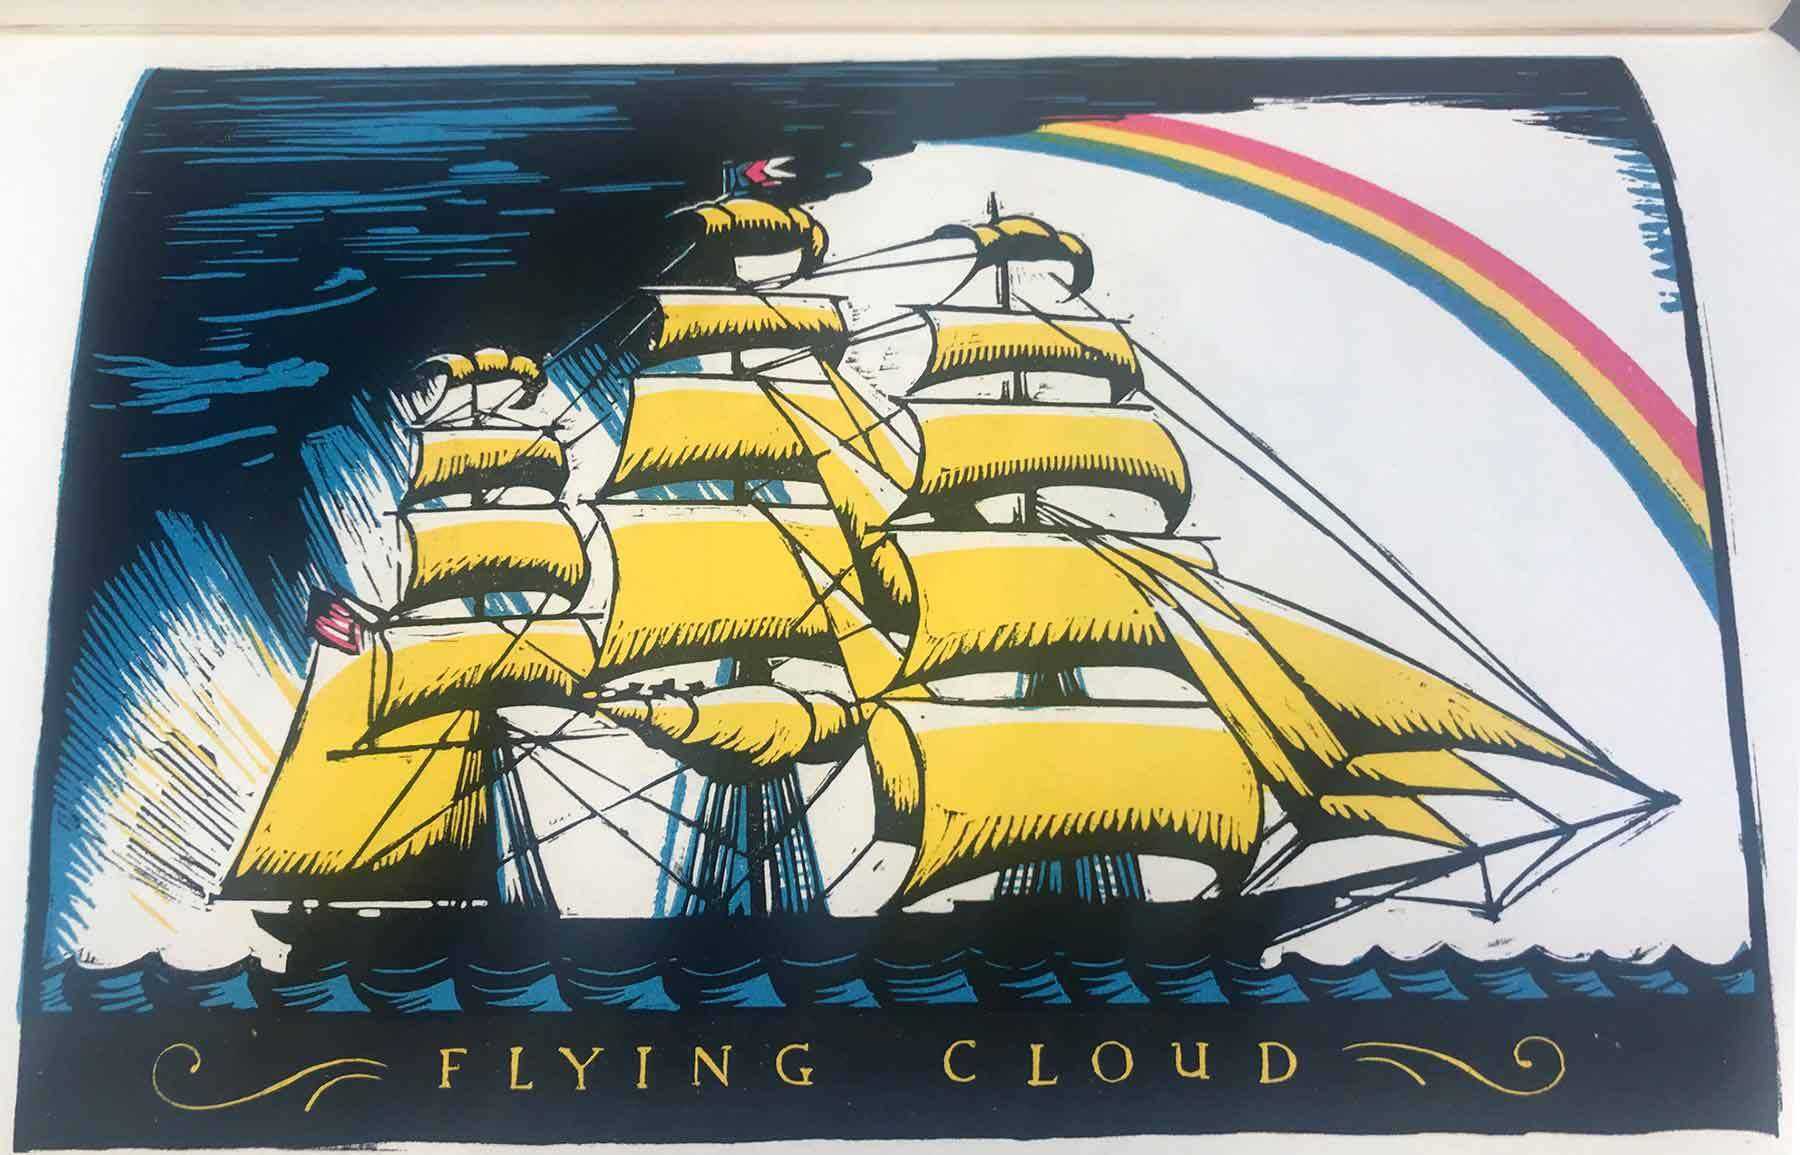 a drawing of a flying cloud ship with a rainbow in the background.